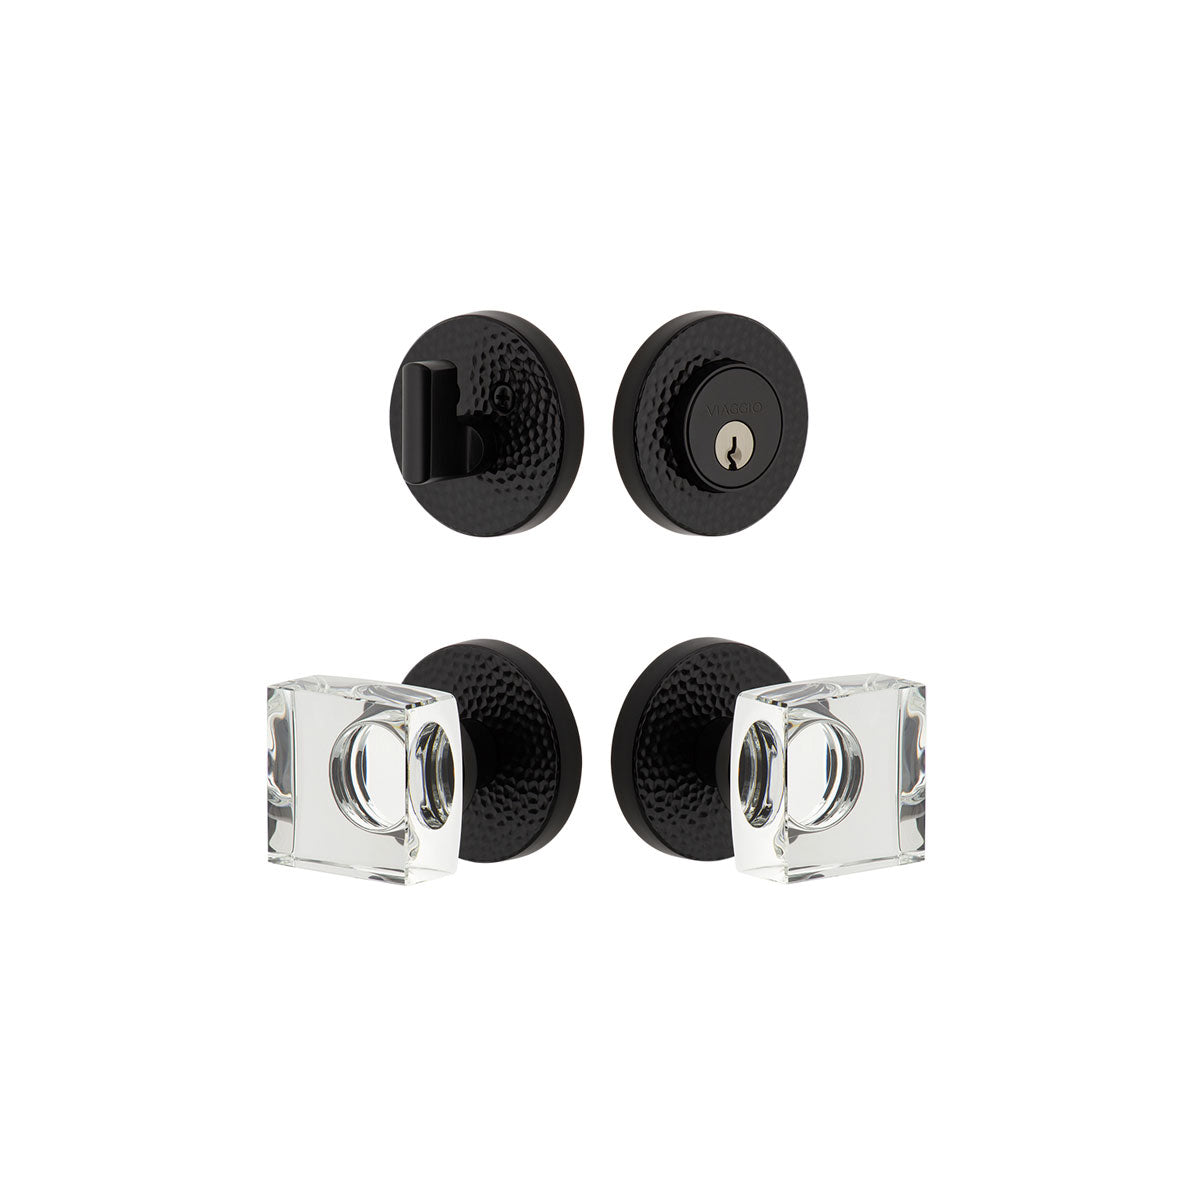 Circolo Hammered Rosette Entry Set with Quadrato Crystal Knob in Satin Black